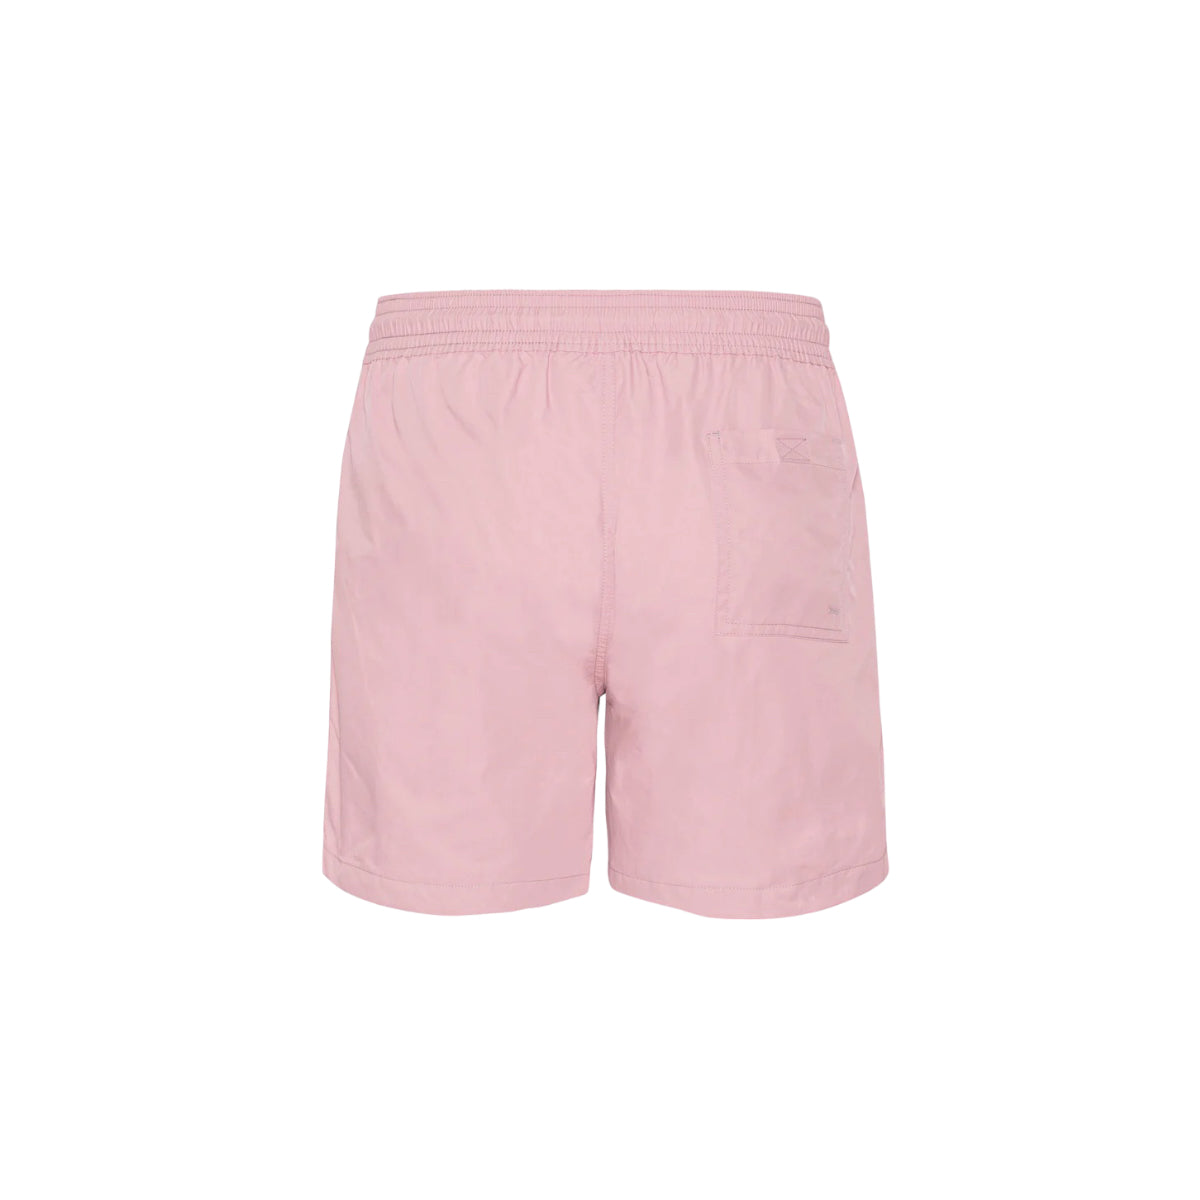 Colorful Standard Classic Swim Shorts faded pink